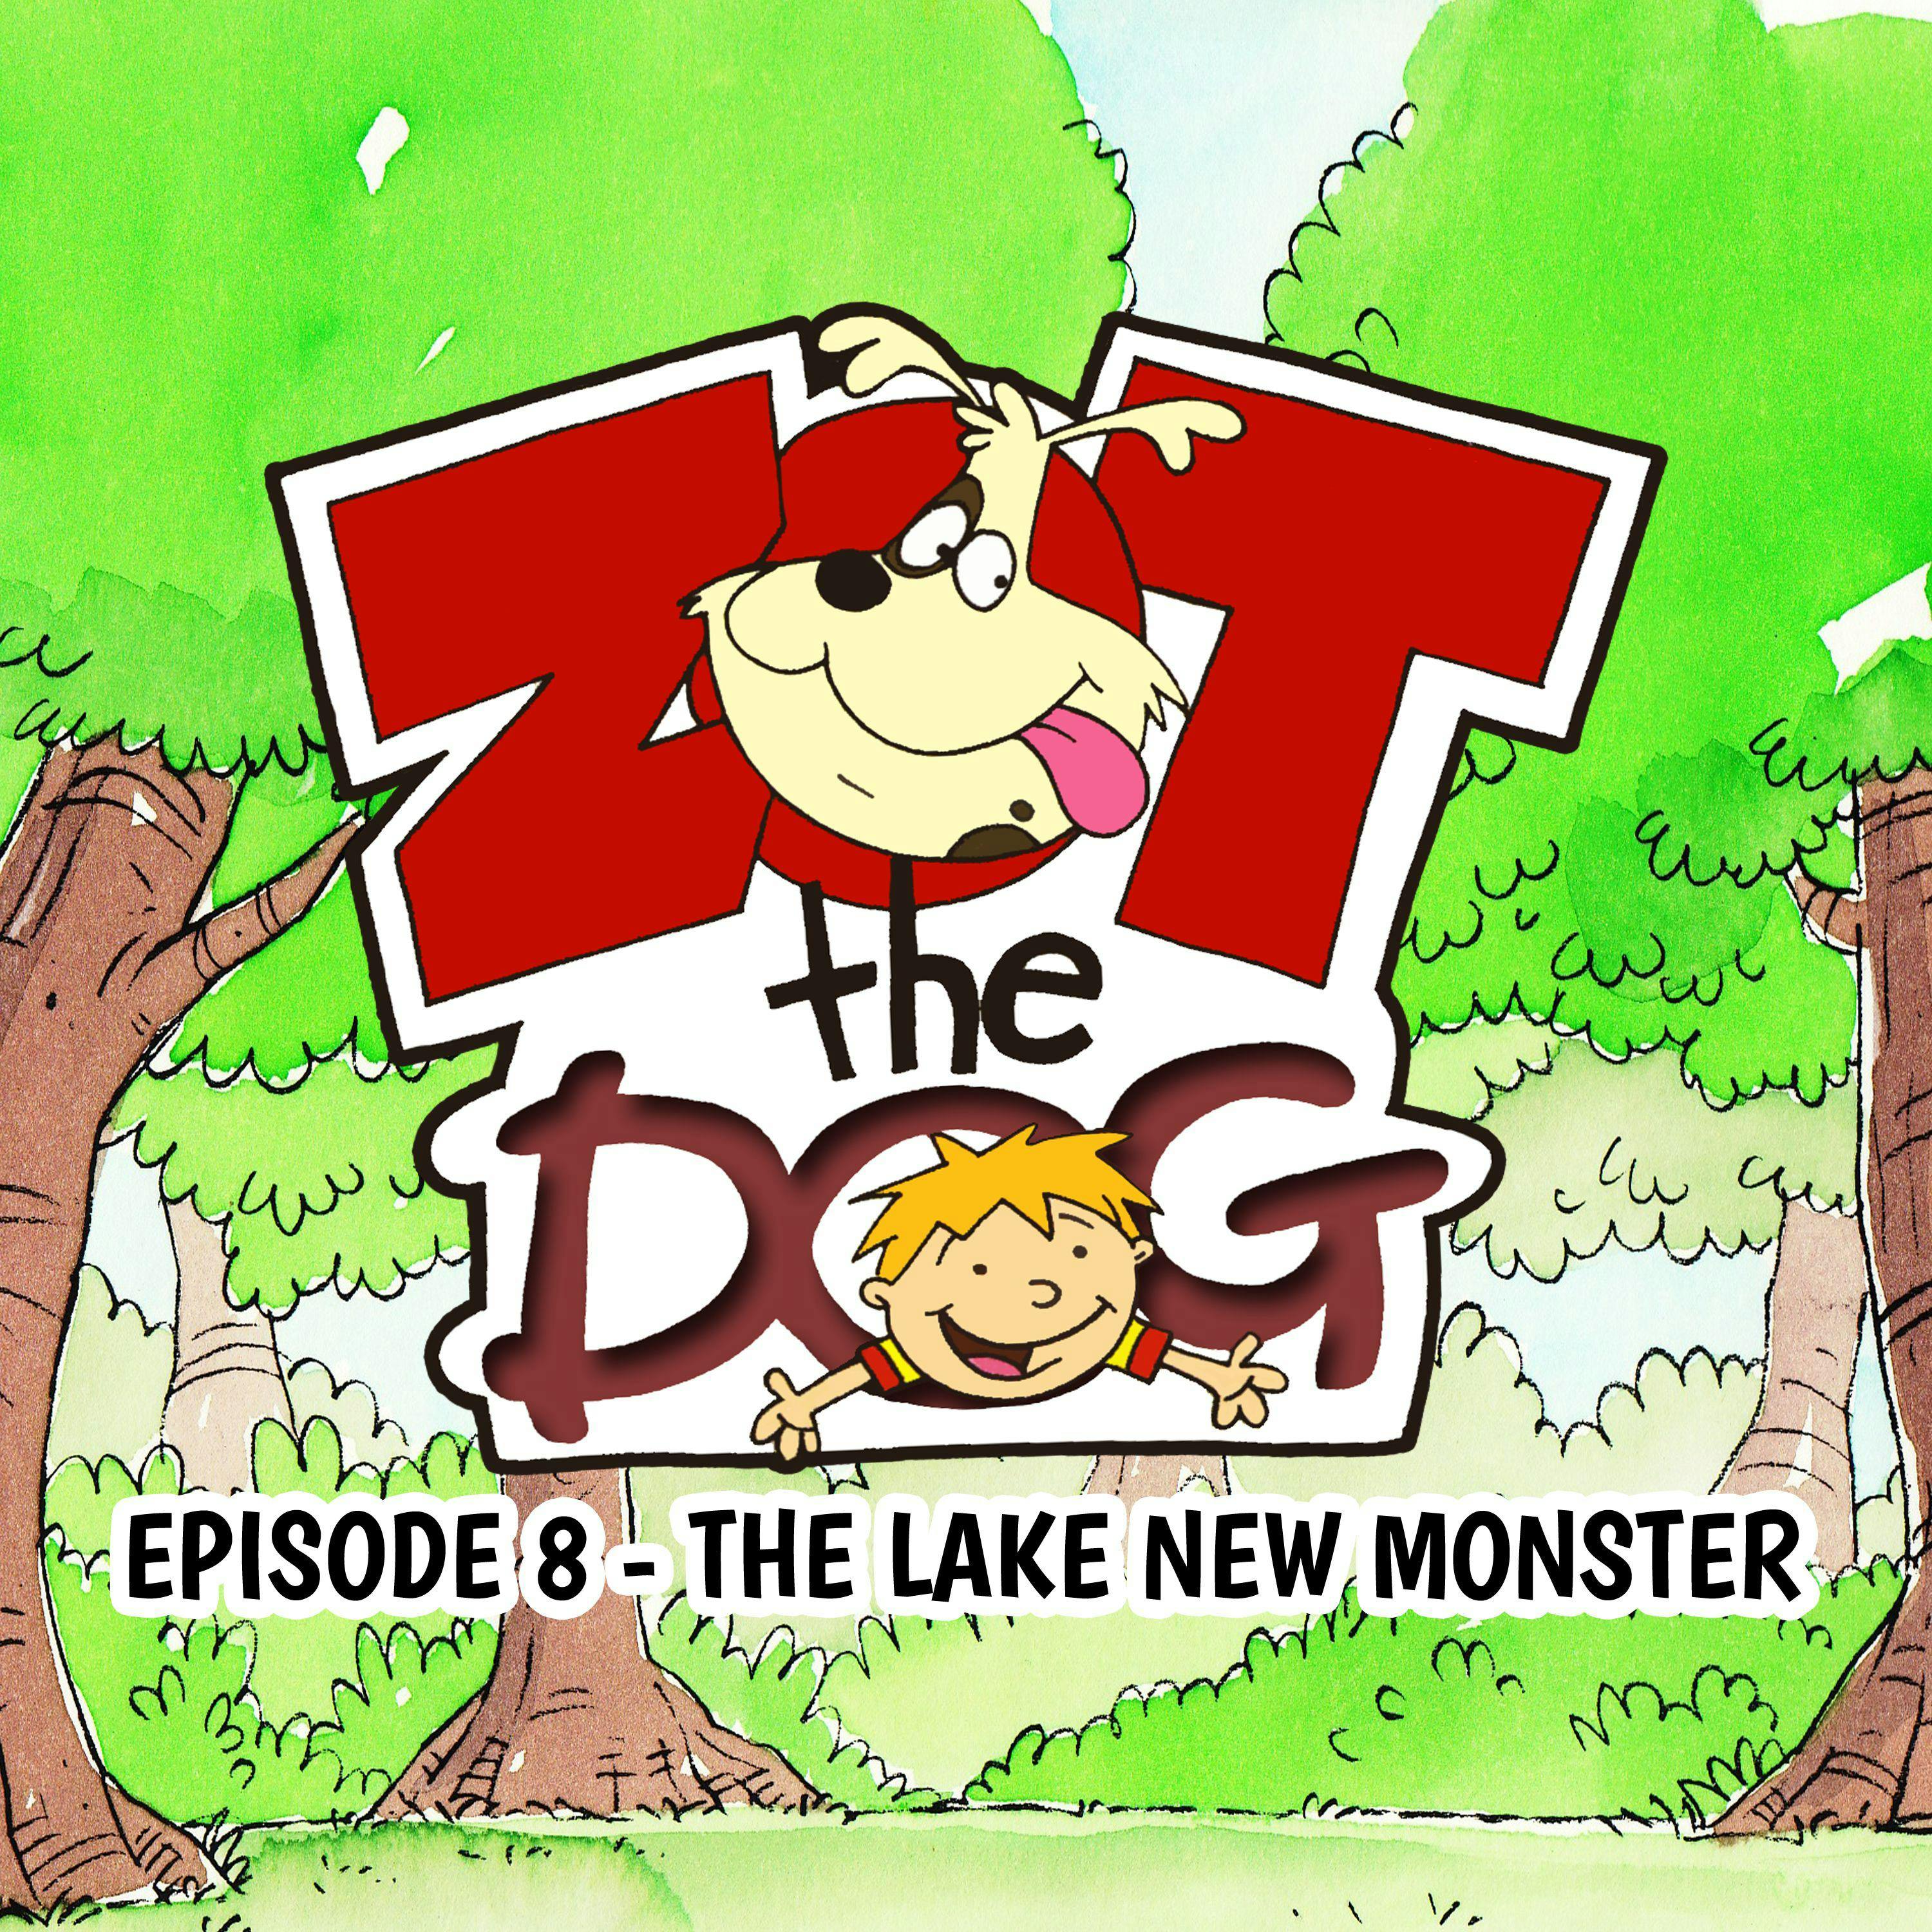 Zot the Dog: Episode 8 - The Lake New Monster - undefined